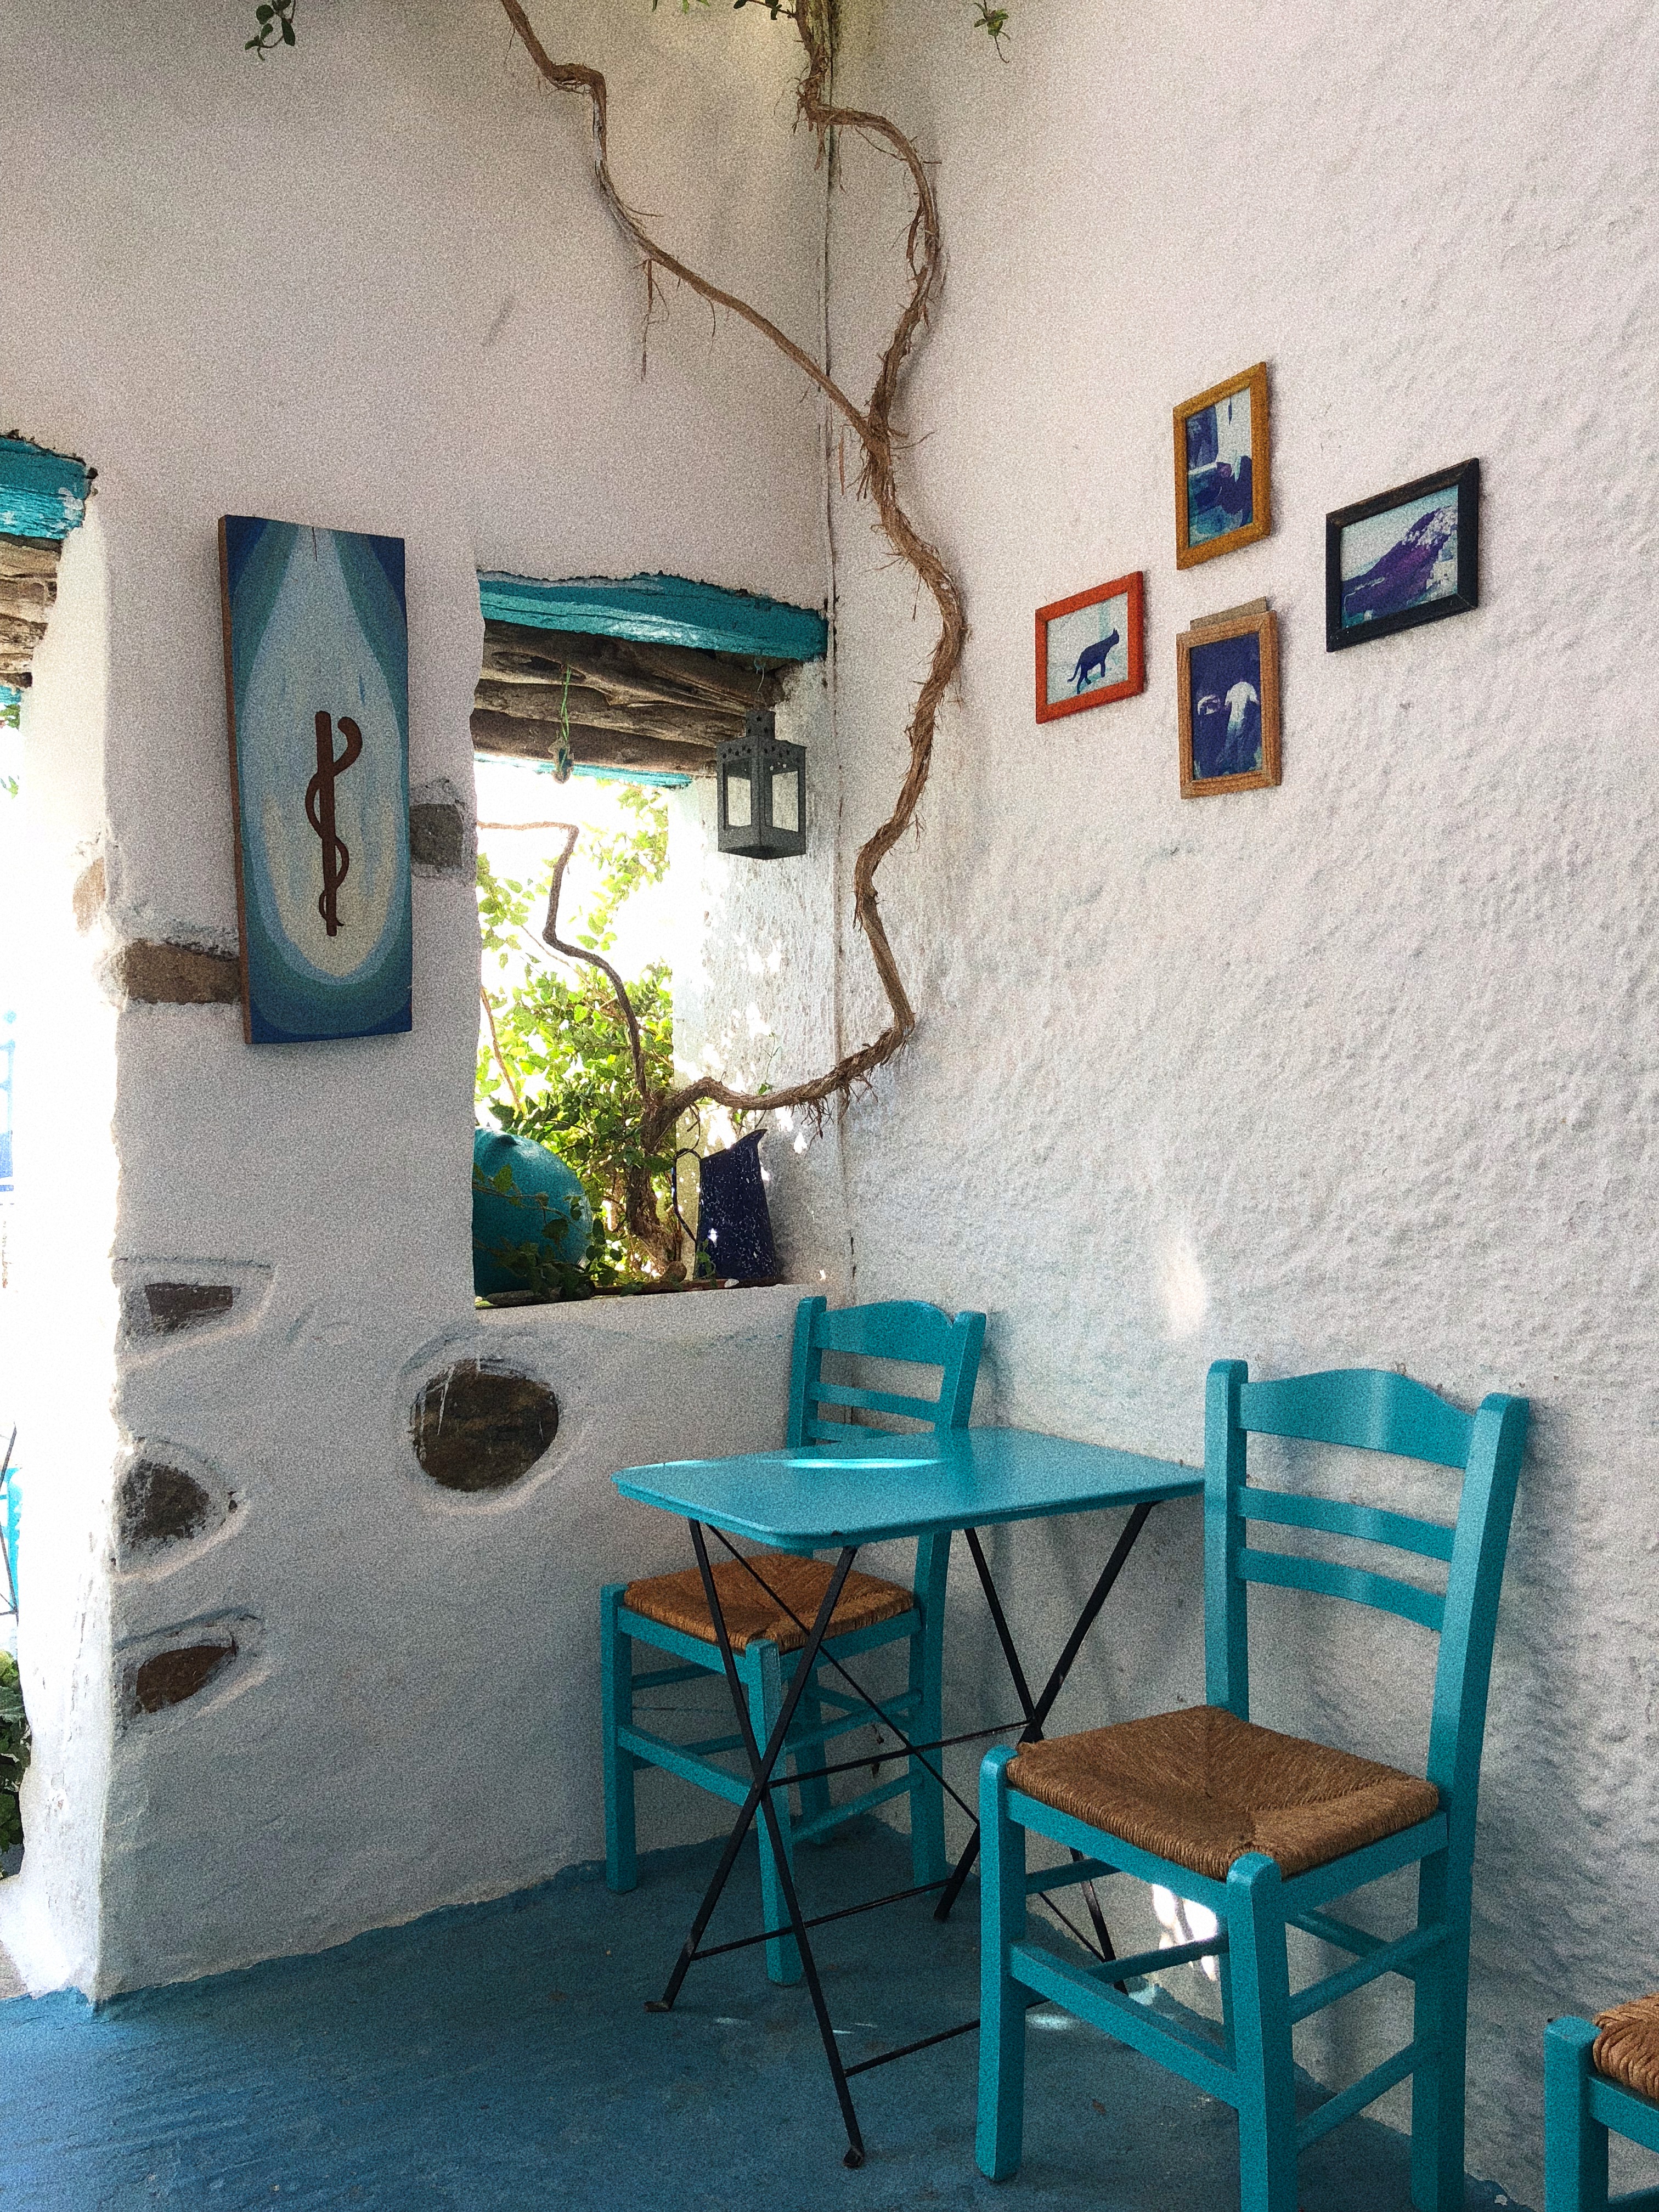 TRAVEL GUIDE TO SERIFOS, GREECE | ISLAND OF THE CYCLOPS